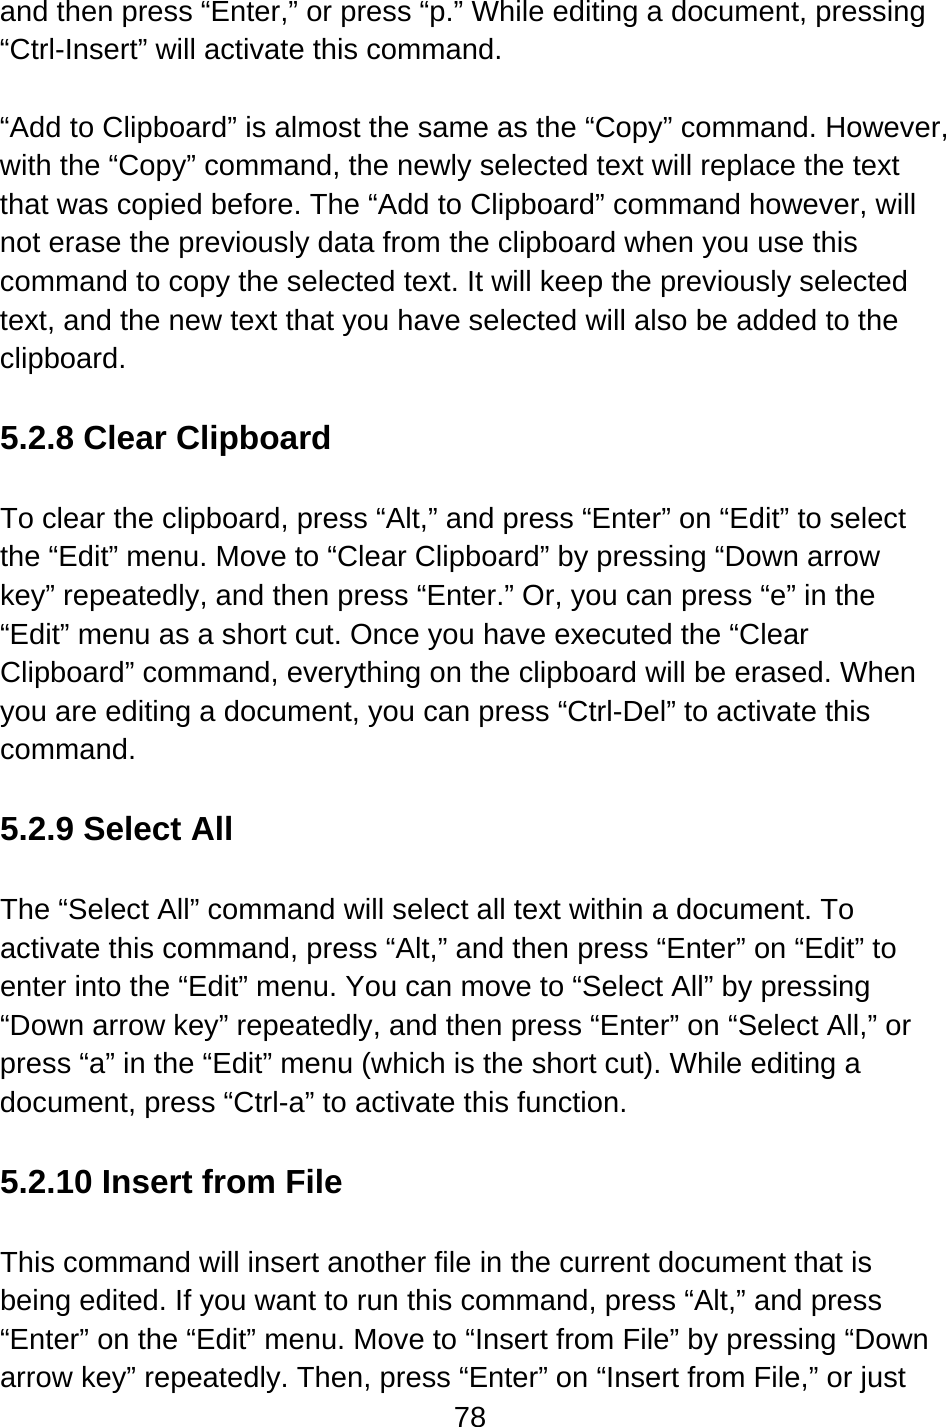 78  and then press “Enter,” or press “p.” While editing a document, pressing “Ctrl-Insert” will activate this command.  “Add to Clipboard” is almost the same as the “Copy” command. However, with the “Copy” command, the newly selected text will replace the text that was copied before. The “Add to Clipboard” command however, will not erase the previously data from the clipboard when you use this command to copy the selected text. It will keep the previously selected text, and the new text that you have selected will also be added to the clipboard.  5.2.8 Clear Clipboard  To clear the clipboard, press “Alt,” and press “Enter” on “Edit” to select the “Edit” menu. Move to “Clear Clipboard” by pressing “Down arrow key” repeatedly, and then press “Enter.” Or, you can press “e” in the “Edit” menu as a short cut. Once you have executed the “Clear Clipboard” command, everything on the clipboard will be erased. When you are editing a document, you can press “Ctrl-Del” to activate this command.  5.2.9 Select All  The “Select All” command will select all text within a document. To activate this command, press “Alt,” and then press “Enter” on “Edit” to enter into the “Edit” menu. You can move to “Select All” by pressing “Down arrow key” repeatedly, and then press “Enter” on “Select All,” or press “a” in the “Edit” menu (which is the short cut). While editing a document, press “Ctrl-a” to activate this function.  5.2.10 Insert from File  This command will insert another file in the current document that is being edited. If you want to run this command, press “Alt,” and press “Enter” on the “Edit” menu. Move to “Insert from File” by pressing “Down arrow key” repeatedly. Then, press “Enter” on “Insert from File,” or just 